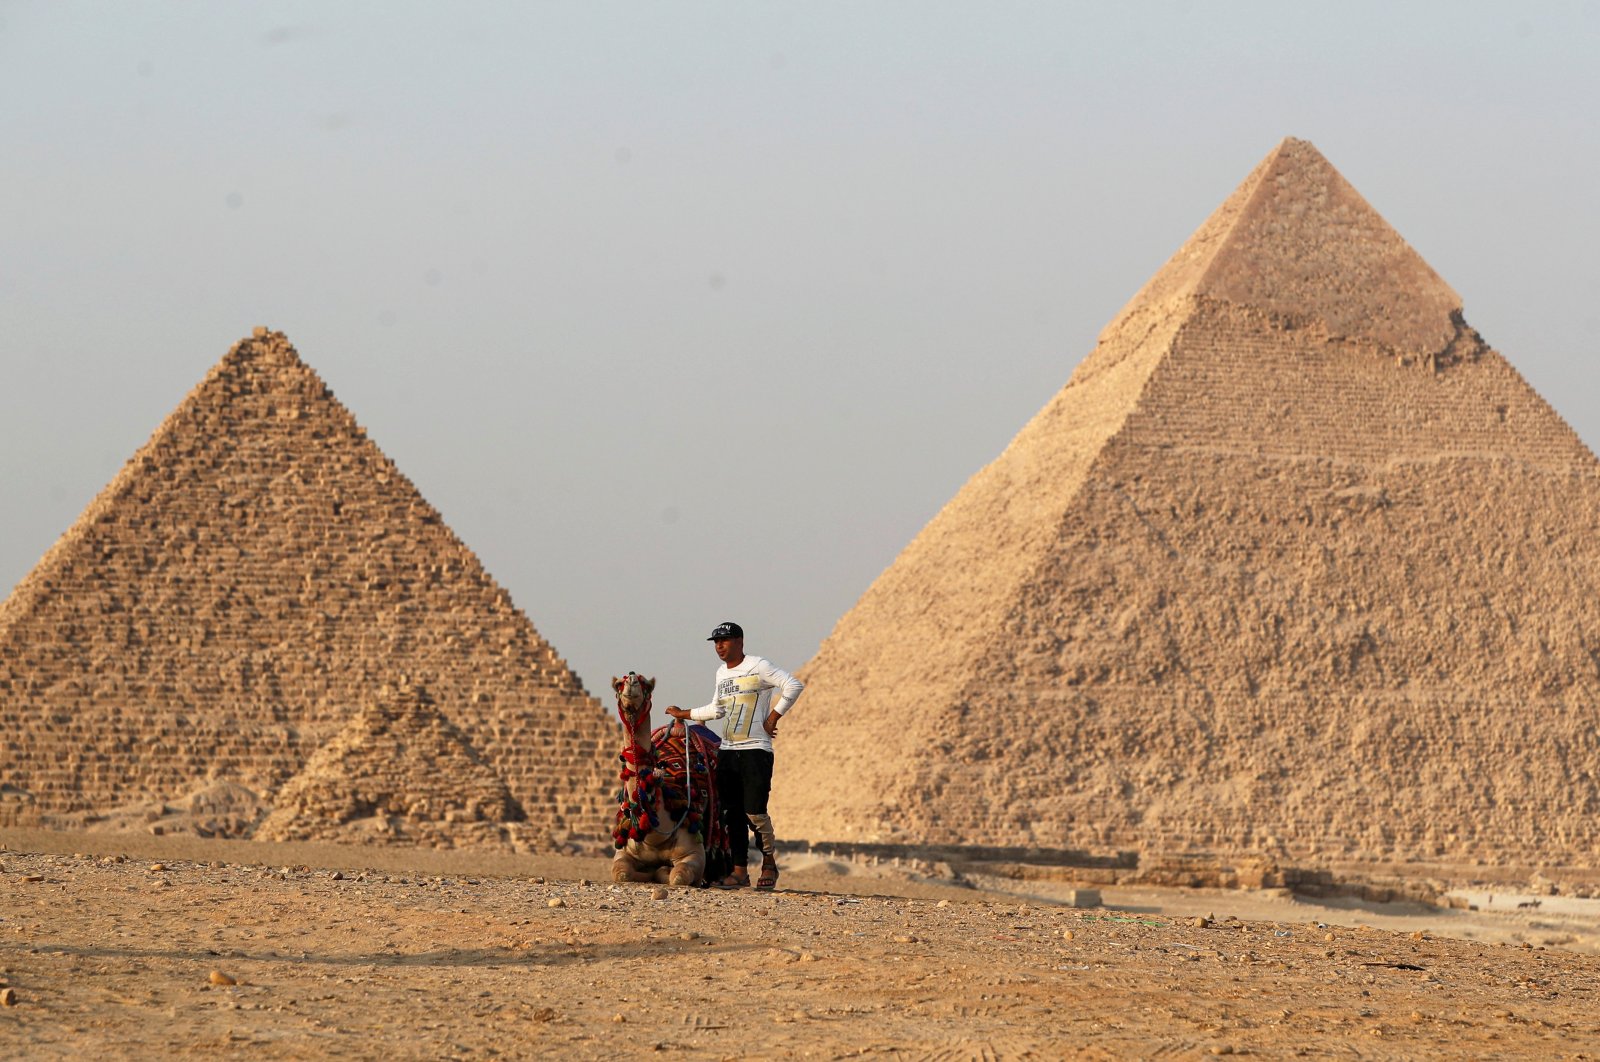 A man with his camel waits for tourists in front of the famed pyramids of Giza, on the outskirt of Cairo, Egypt, Oct. 23, 2021. (Reuters Photo)